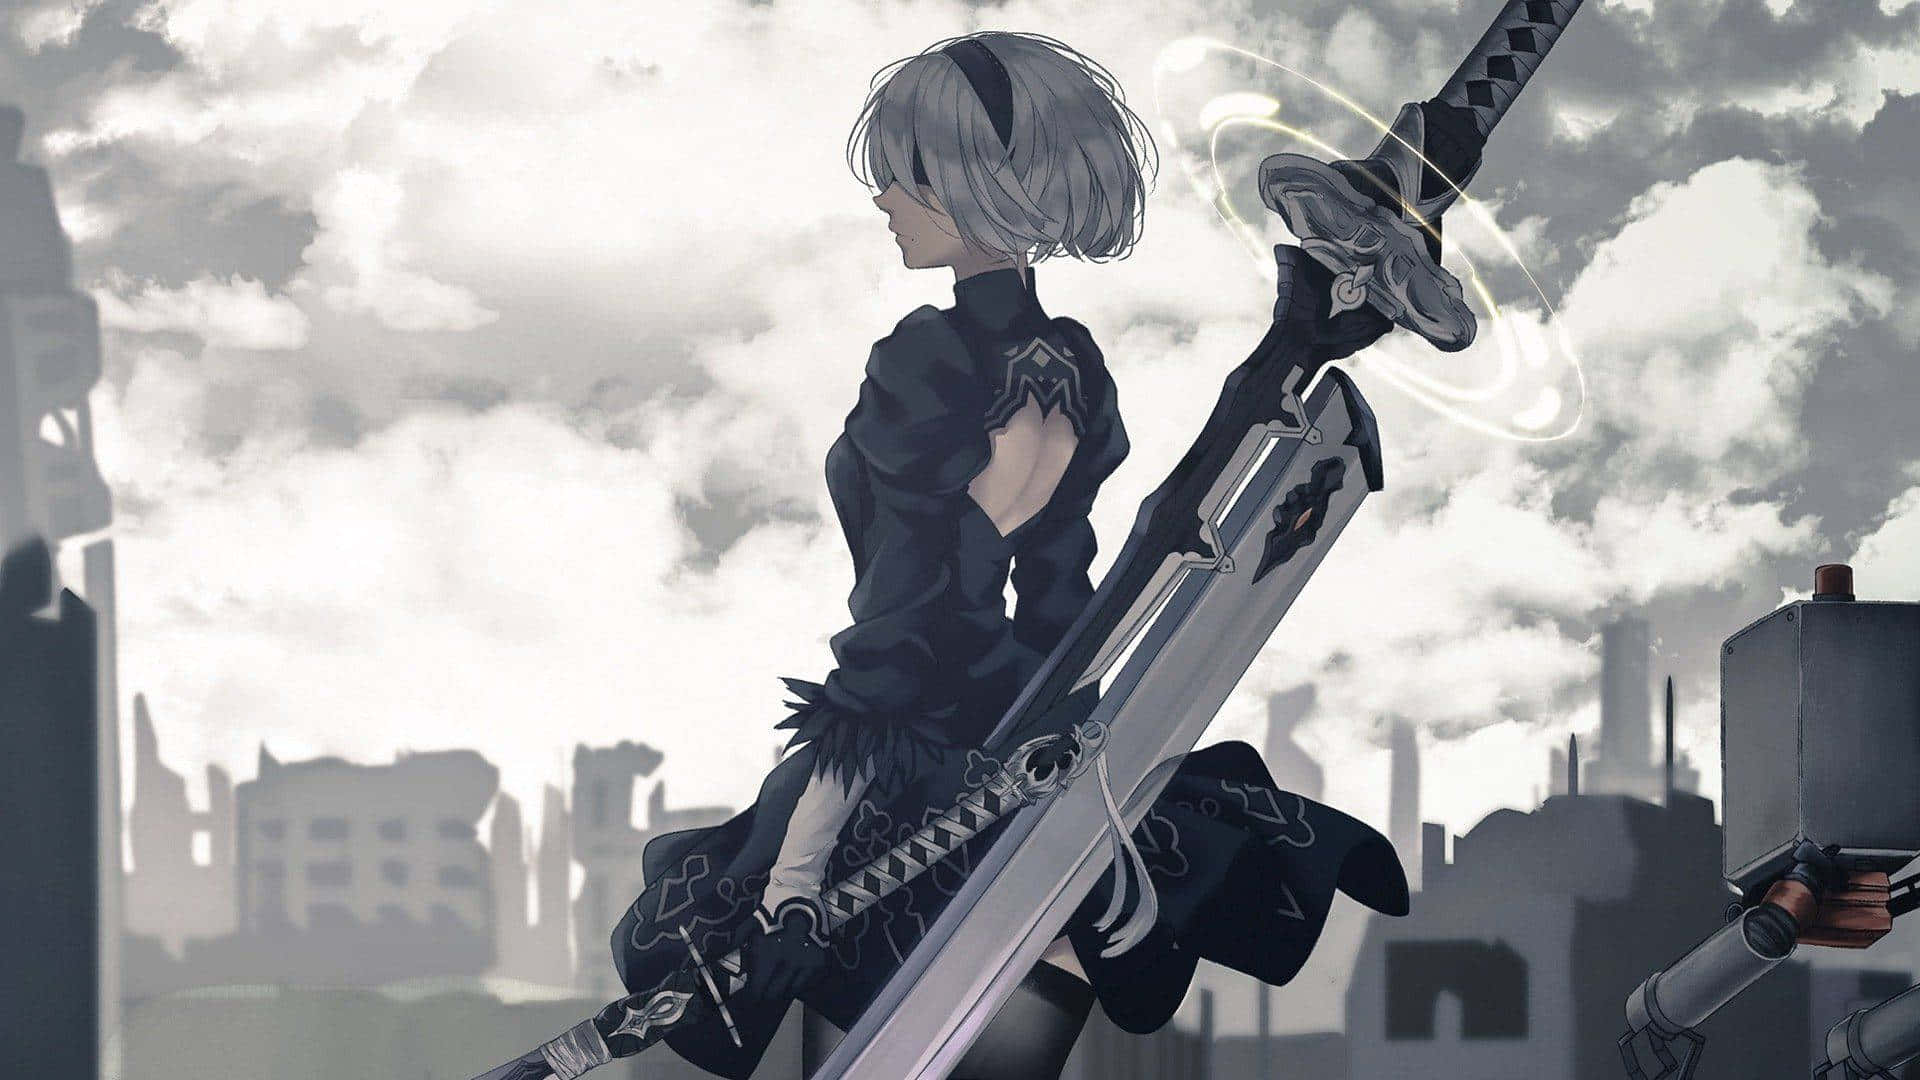 2B, protagonist of the popular action-adventure game NieR:Automata